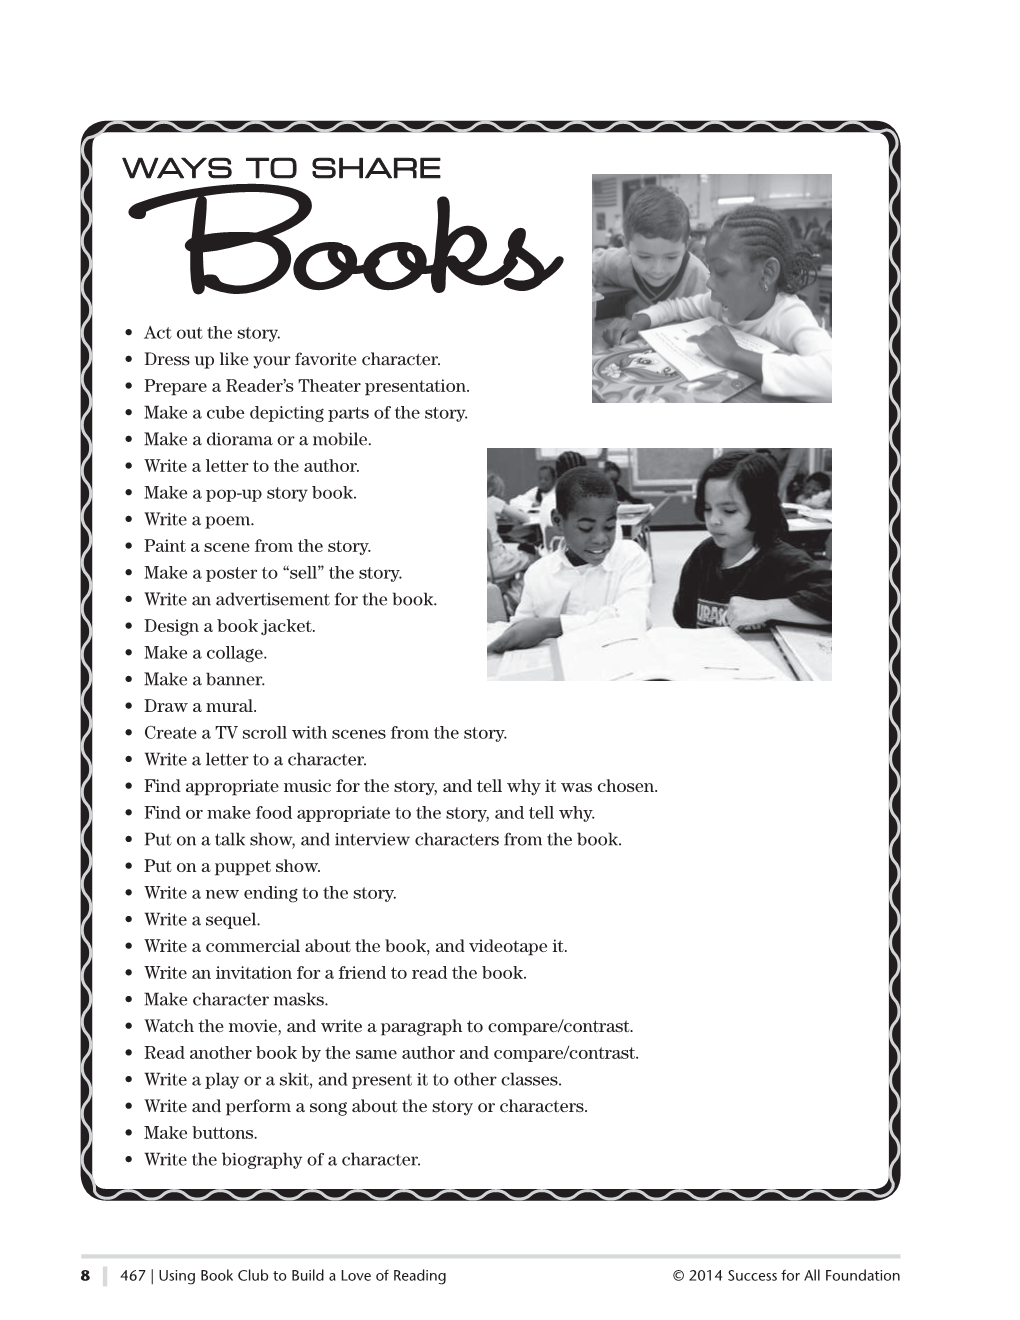 Ways to Share Books Continued